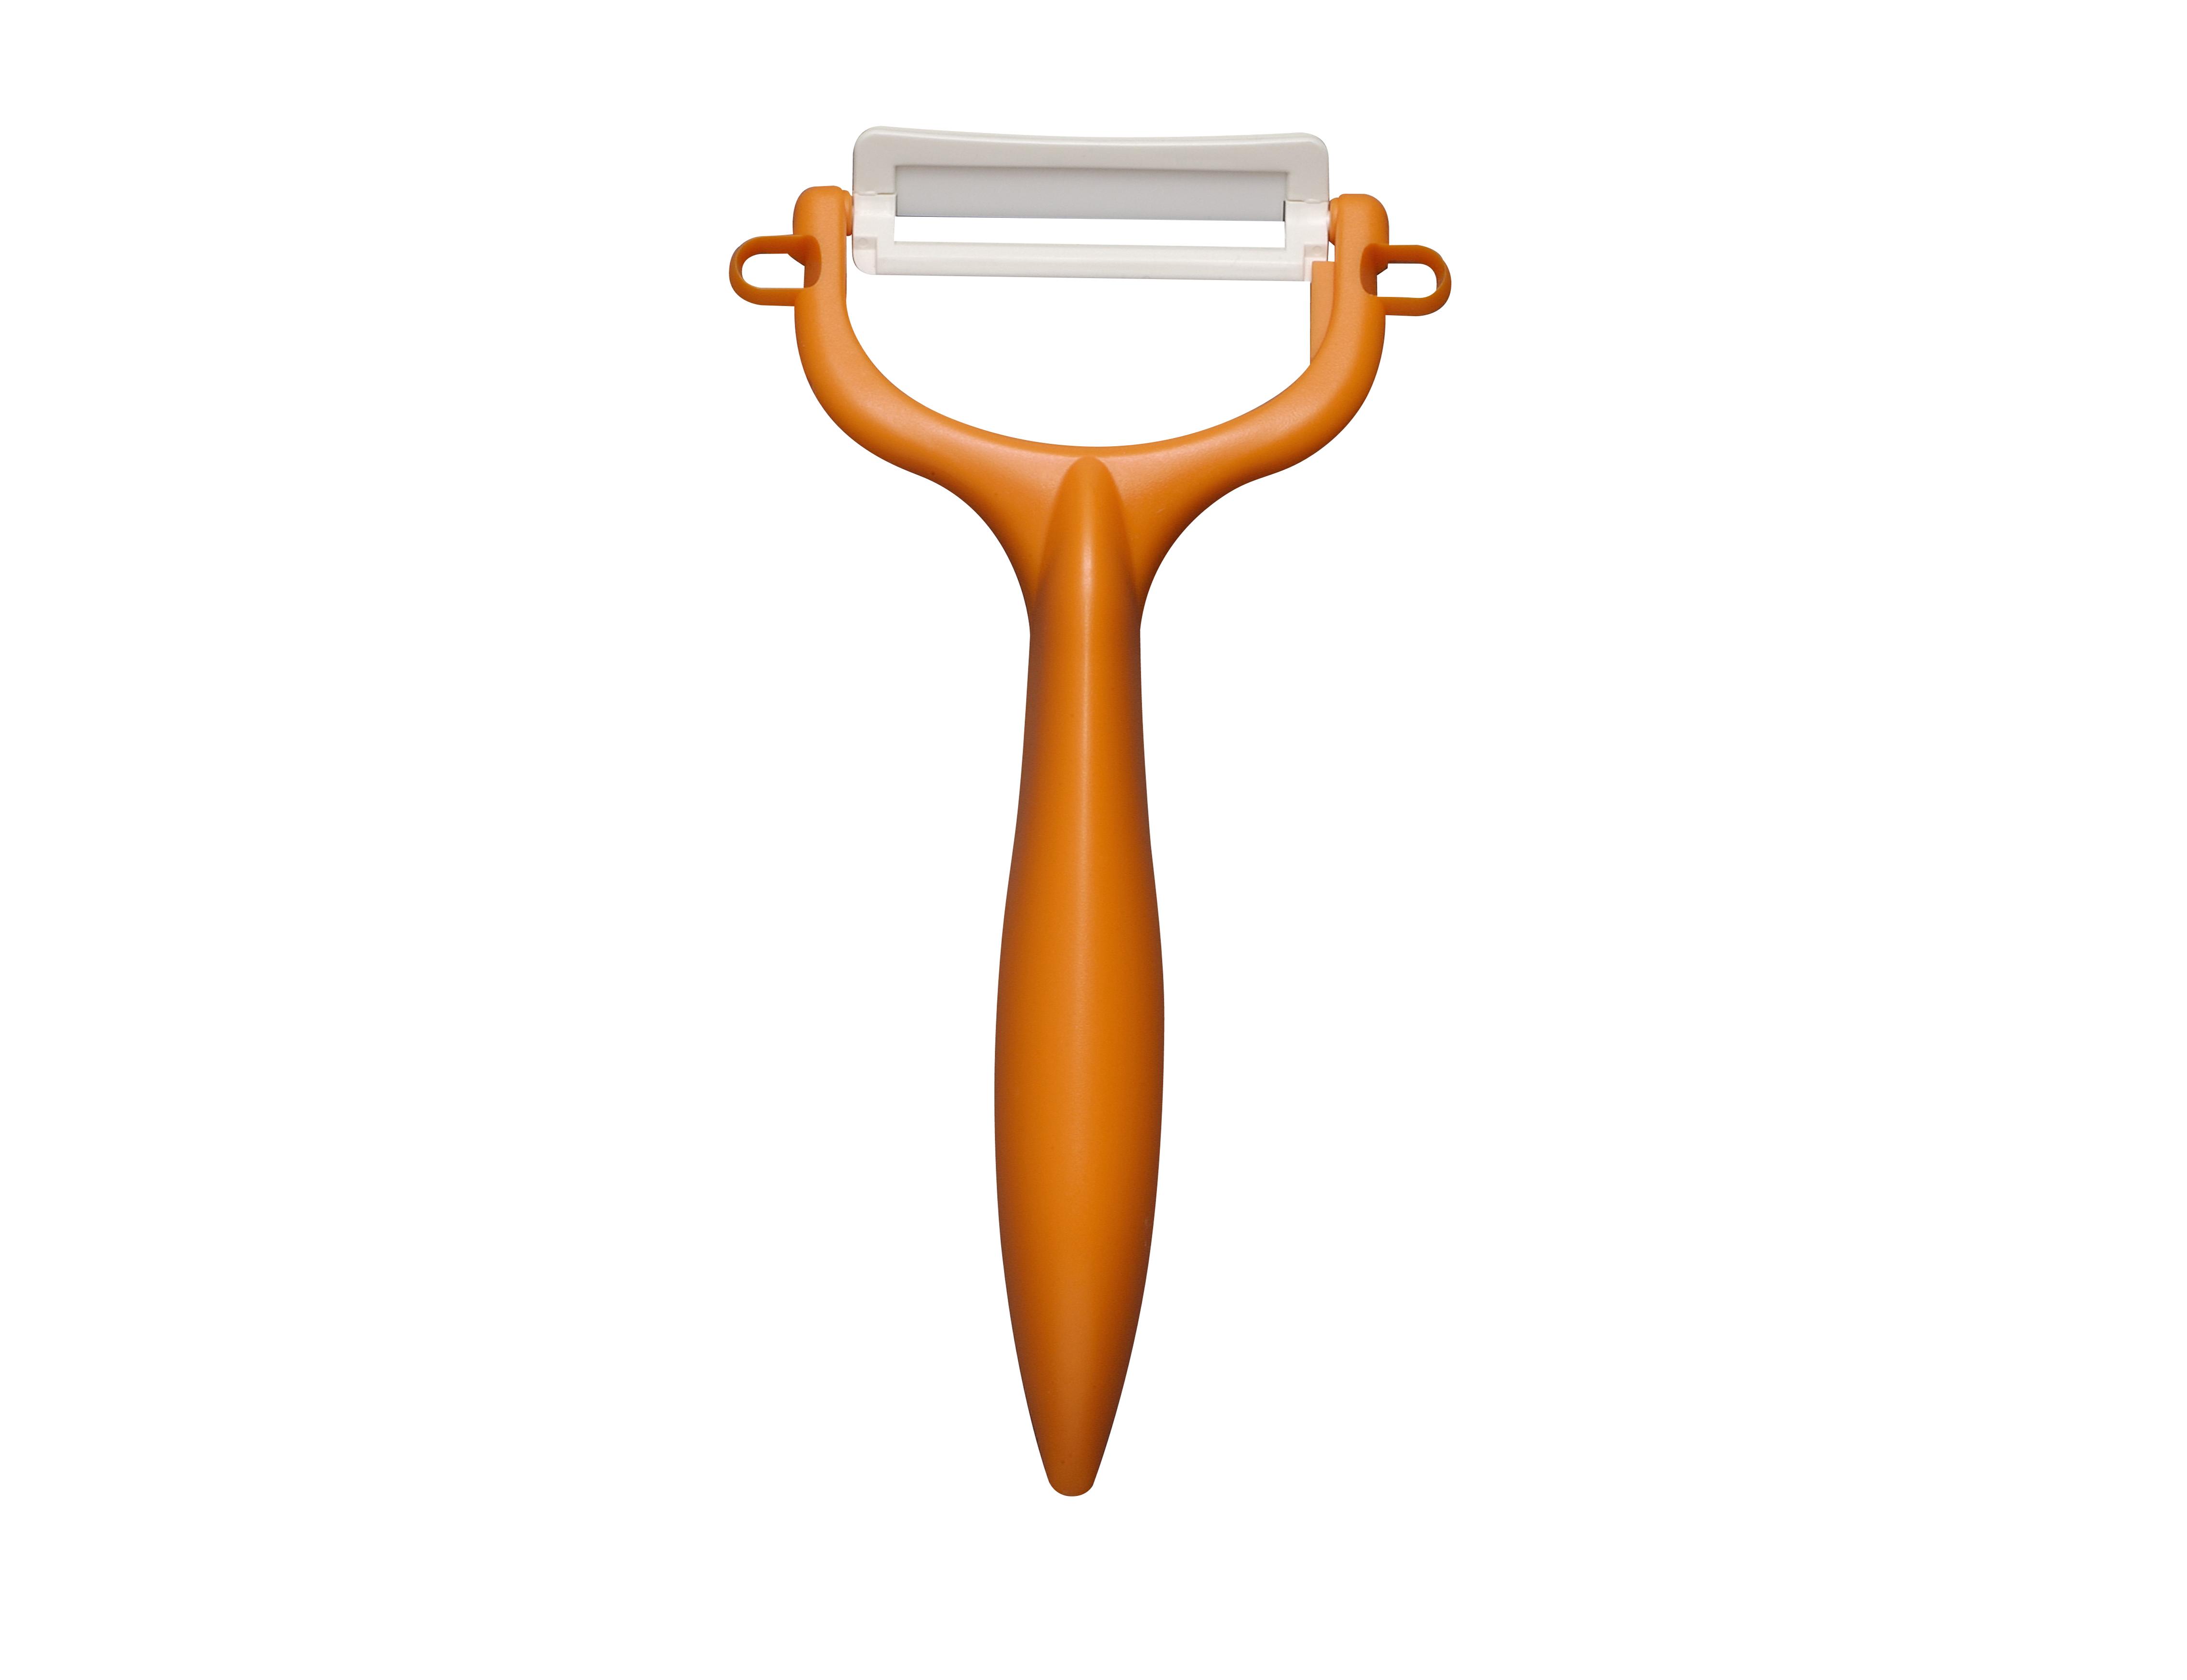 Kyocera CP-NA10X-OR Peeler, Ceramic, Sterilization, Bleaching, OK to Tanned  Blade, Rubber Handle, Orange, Made in Japan